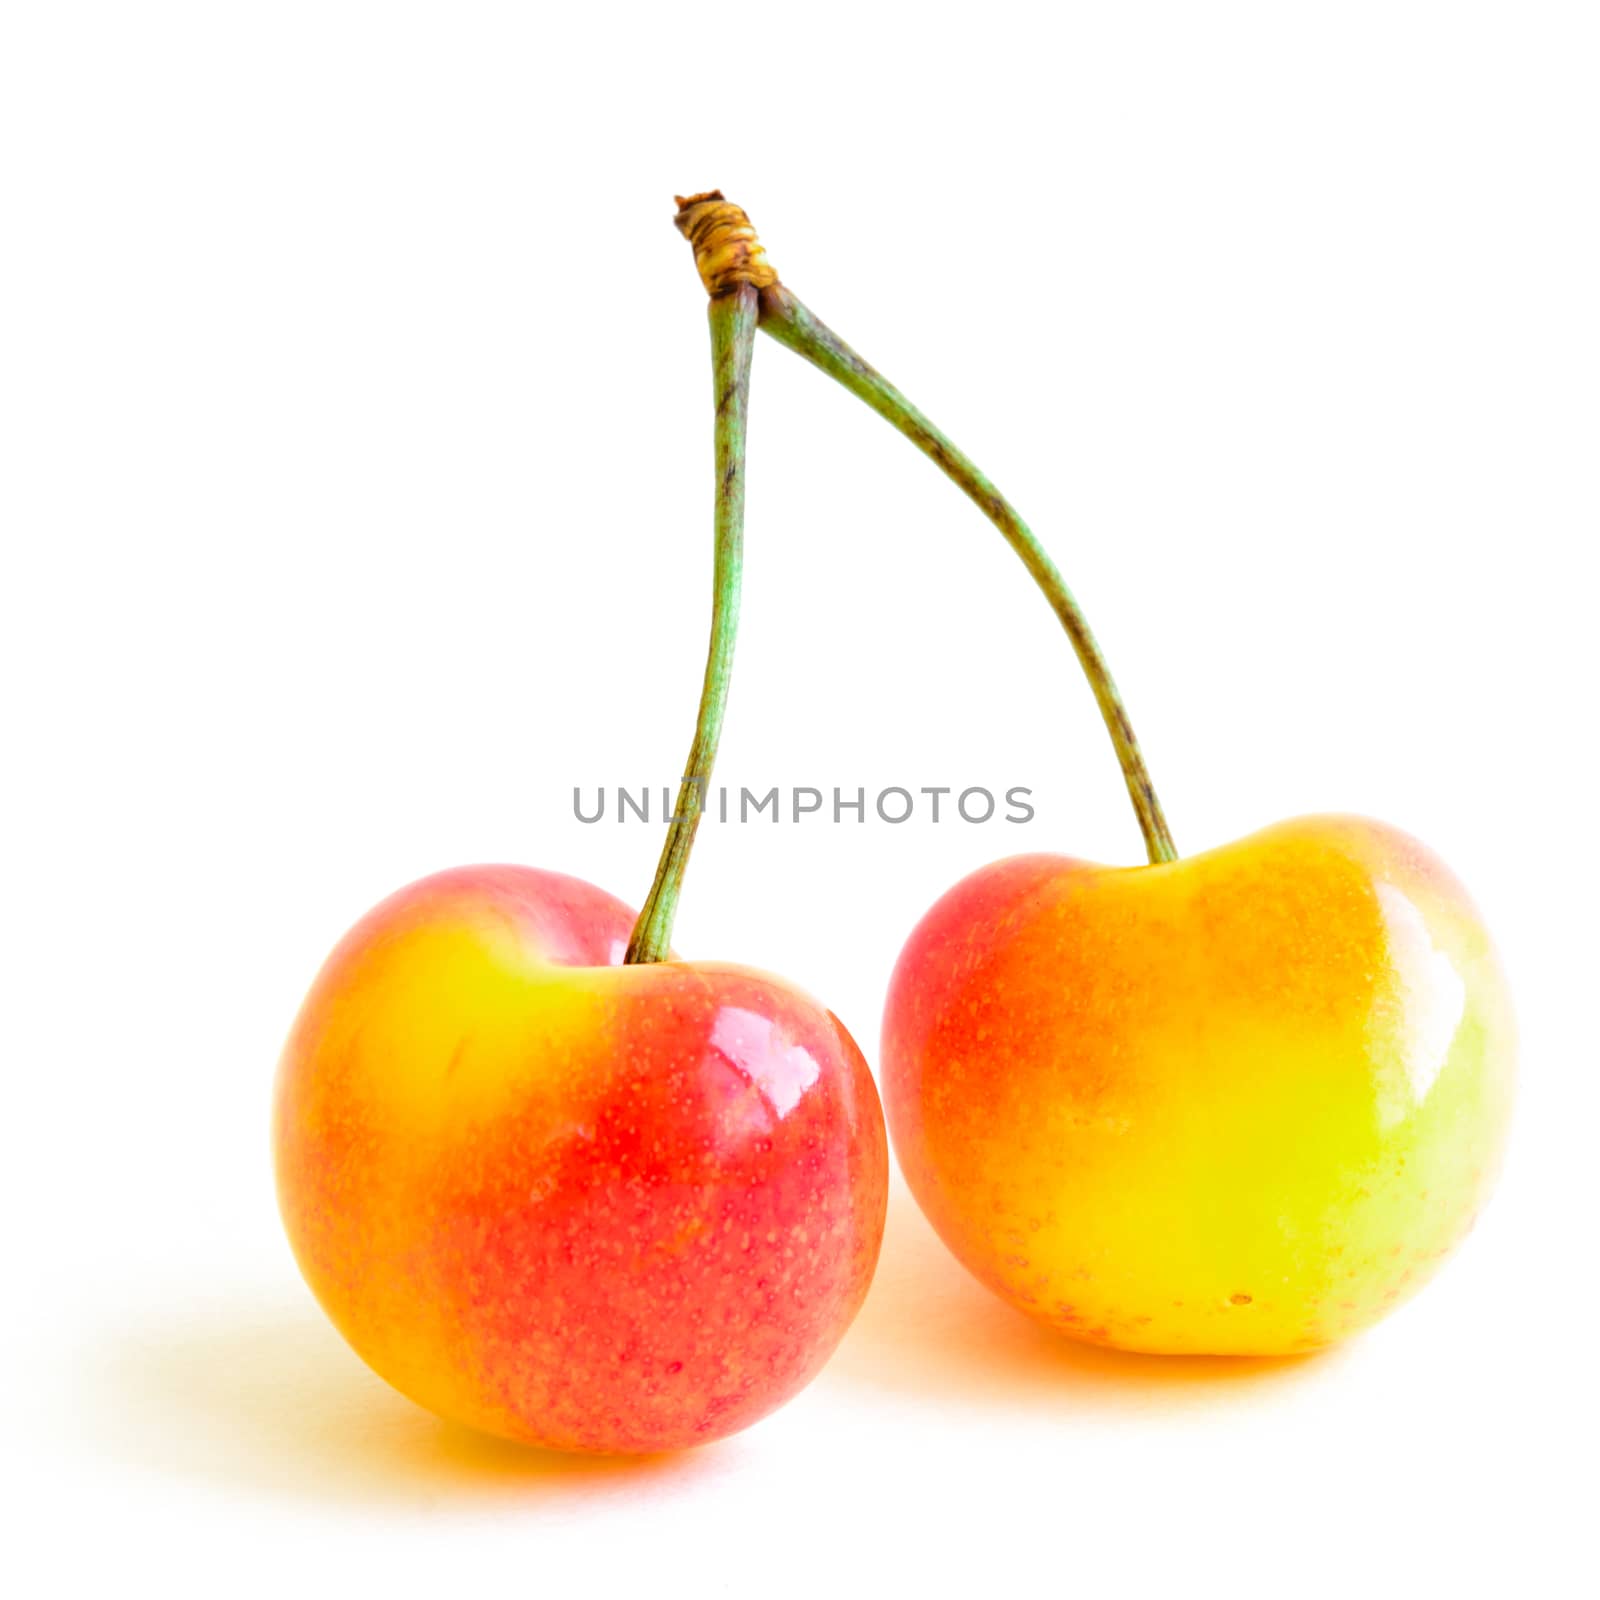 Two Rainer cherries joined with stem isolated on white background. Fresh picked organic cherries grown in Yakima Valley, Washington State, USA.